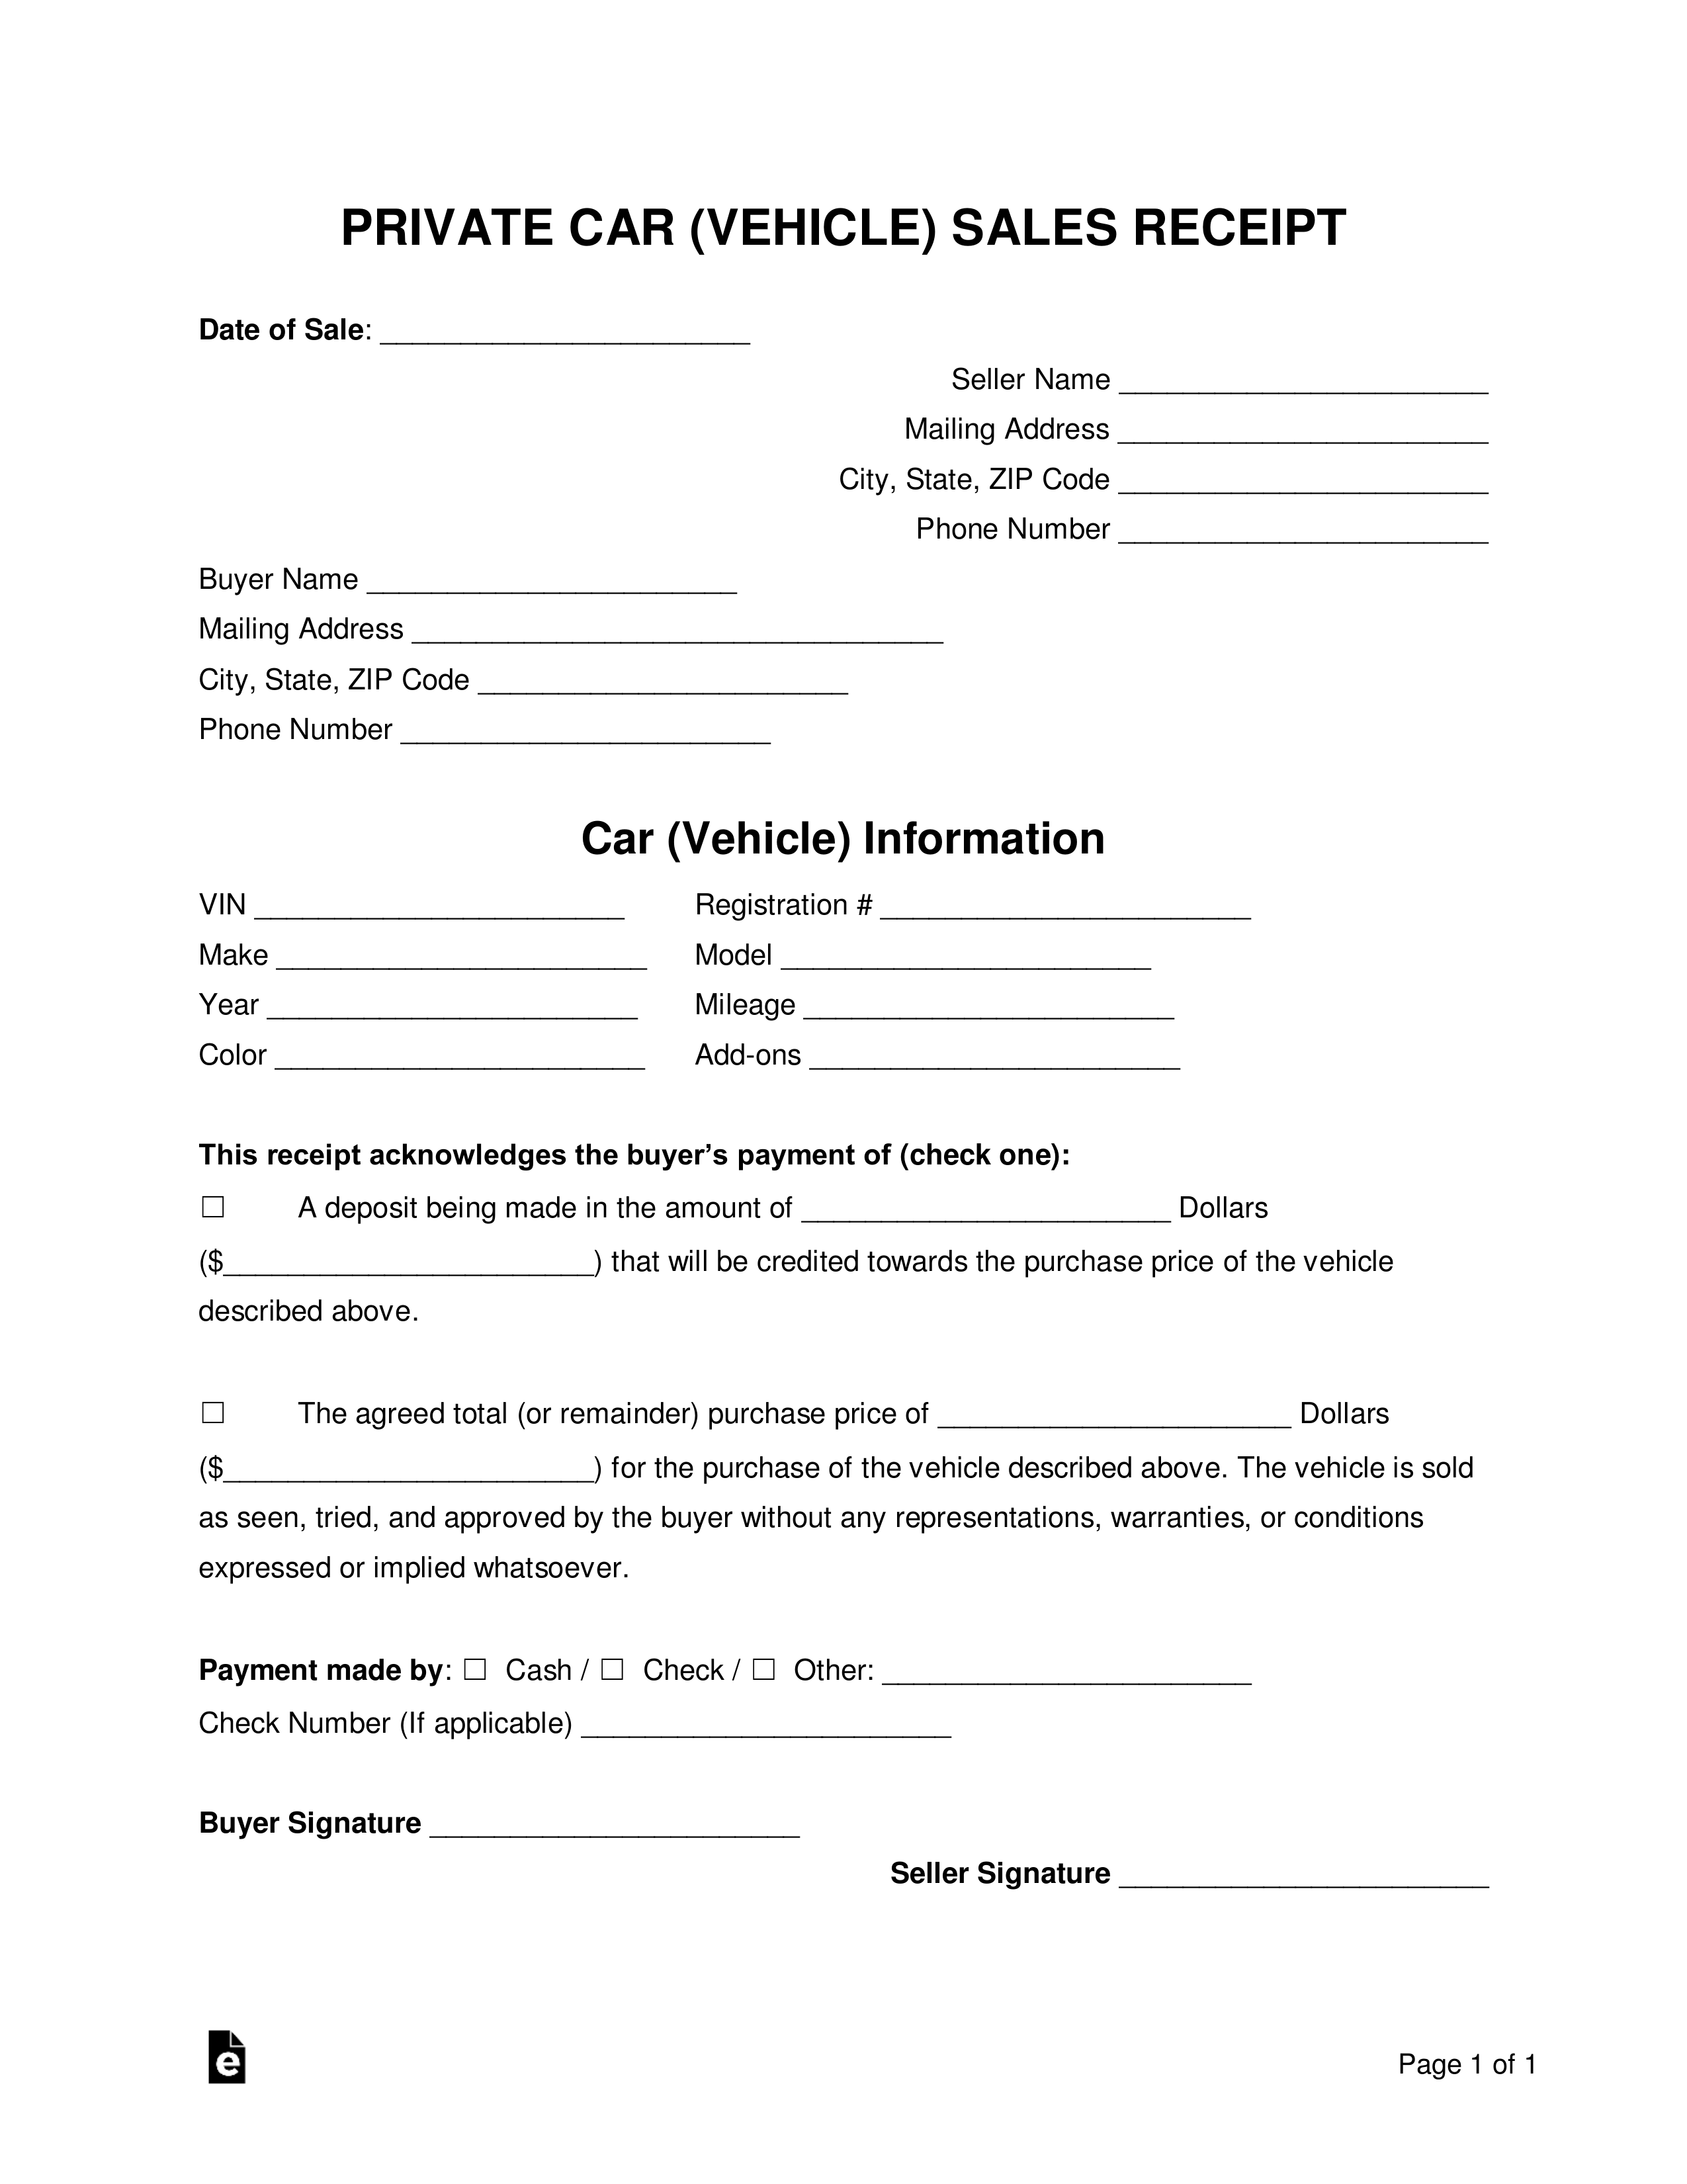 Free Vehicle (Private Sale) Receipt Template - PDF  Word – eForms